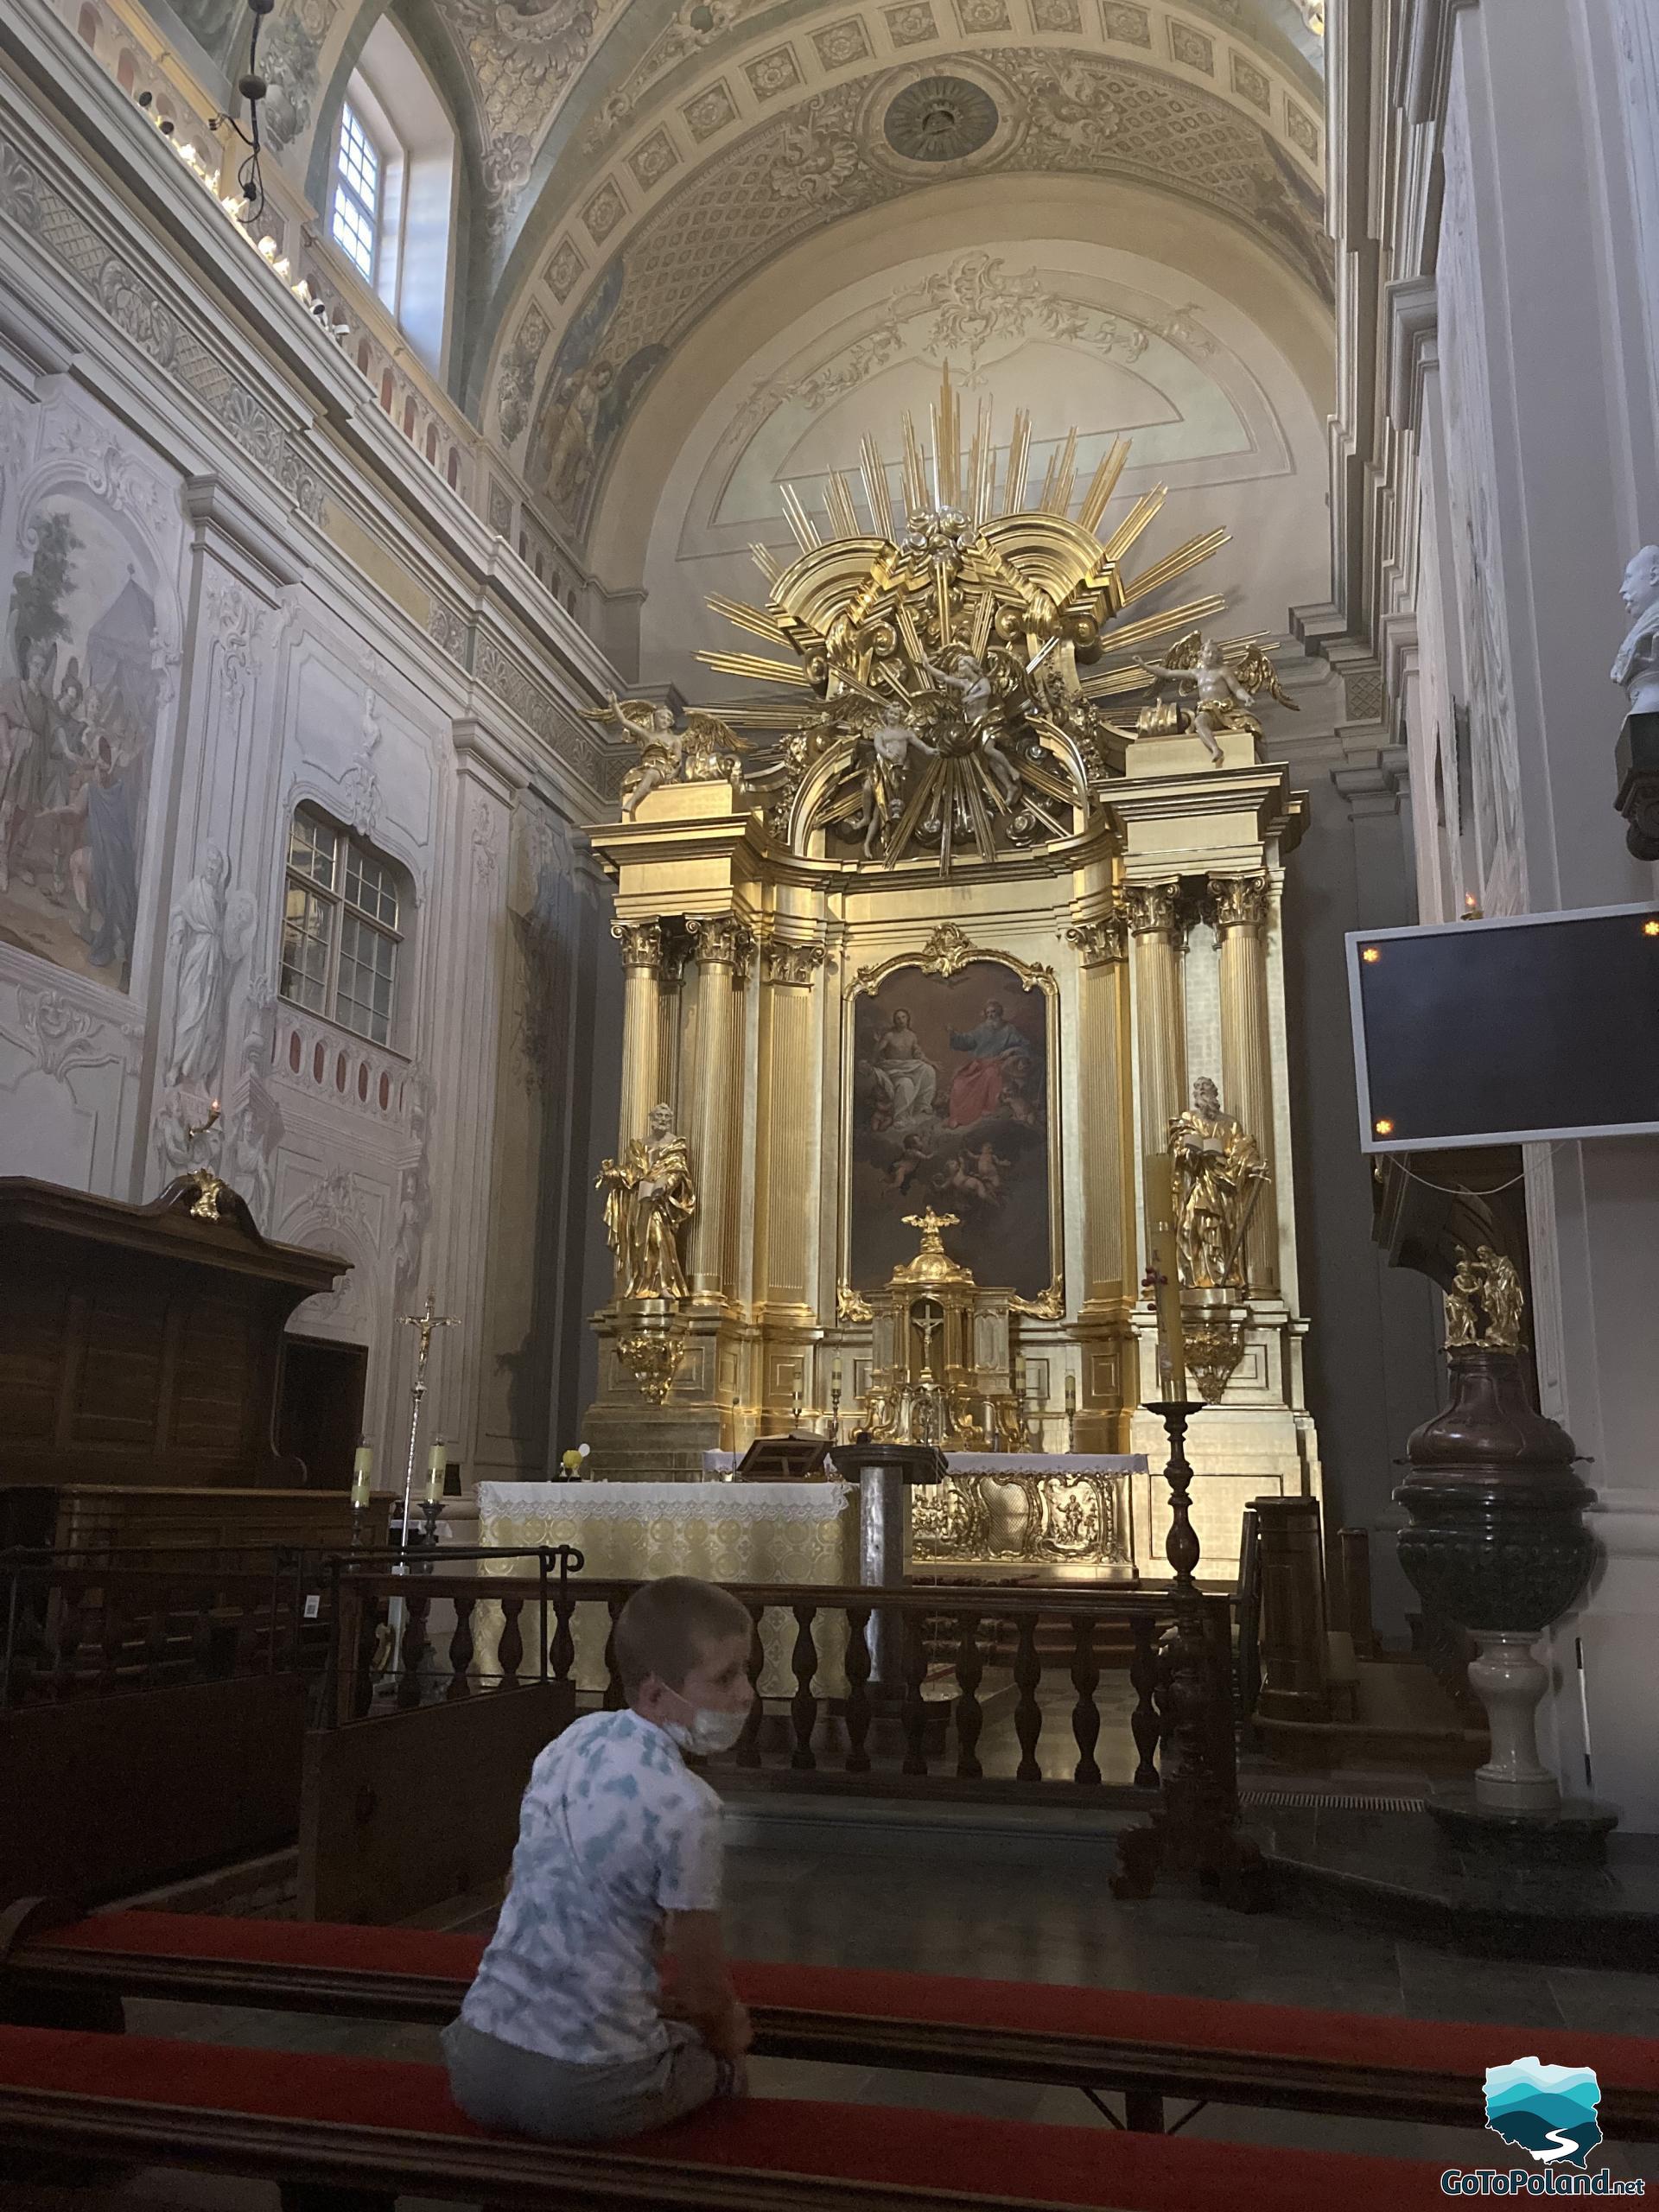 the main golden altar in the church, the boy is sitting in the pew